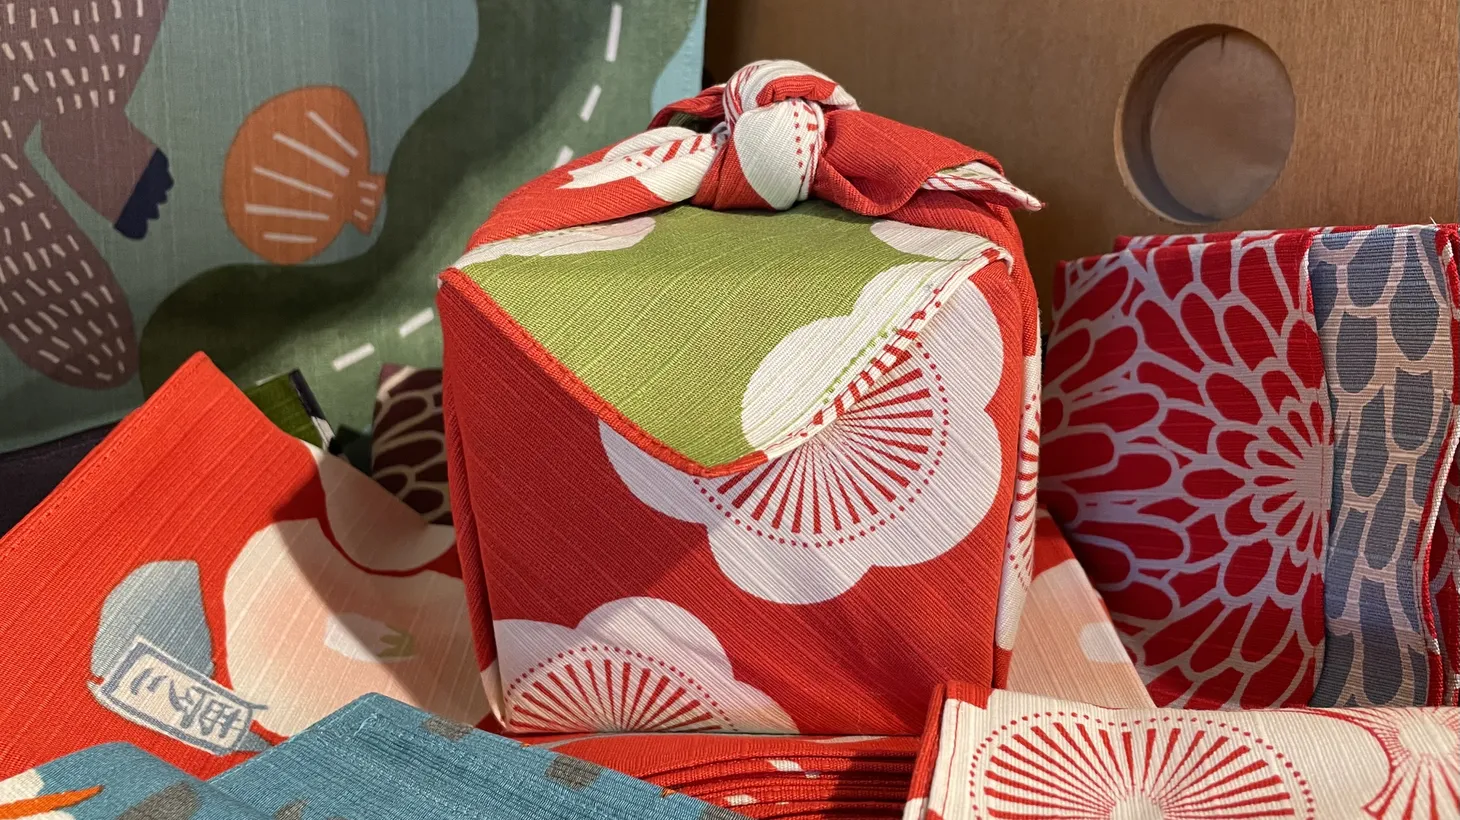 A box wrapped with cloth, using the Japanese wrapping technique of furoshiki, is part of a display in the Craft Contemporary Museum shop.